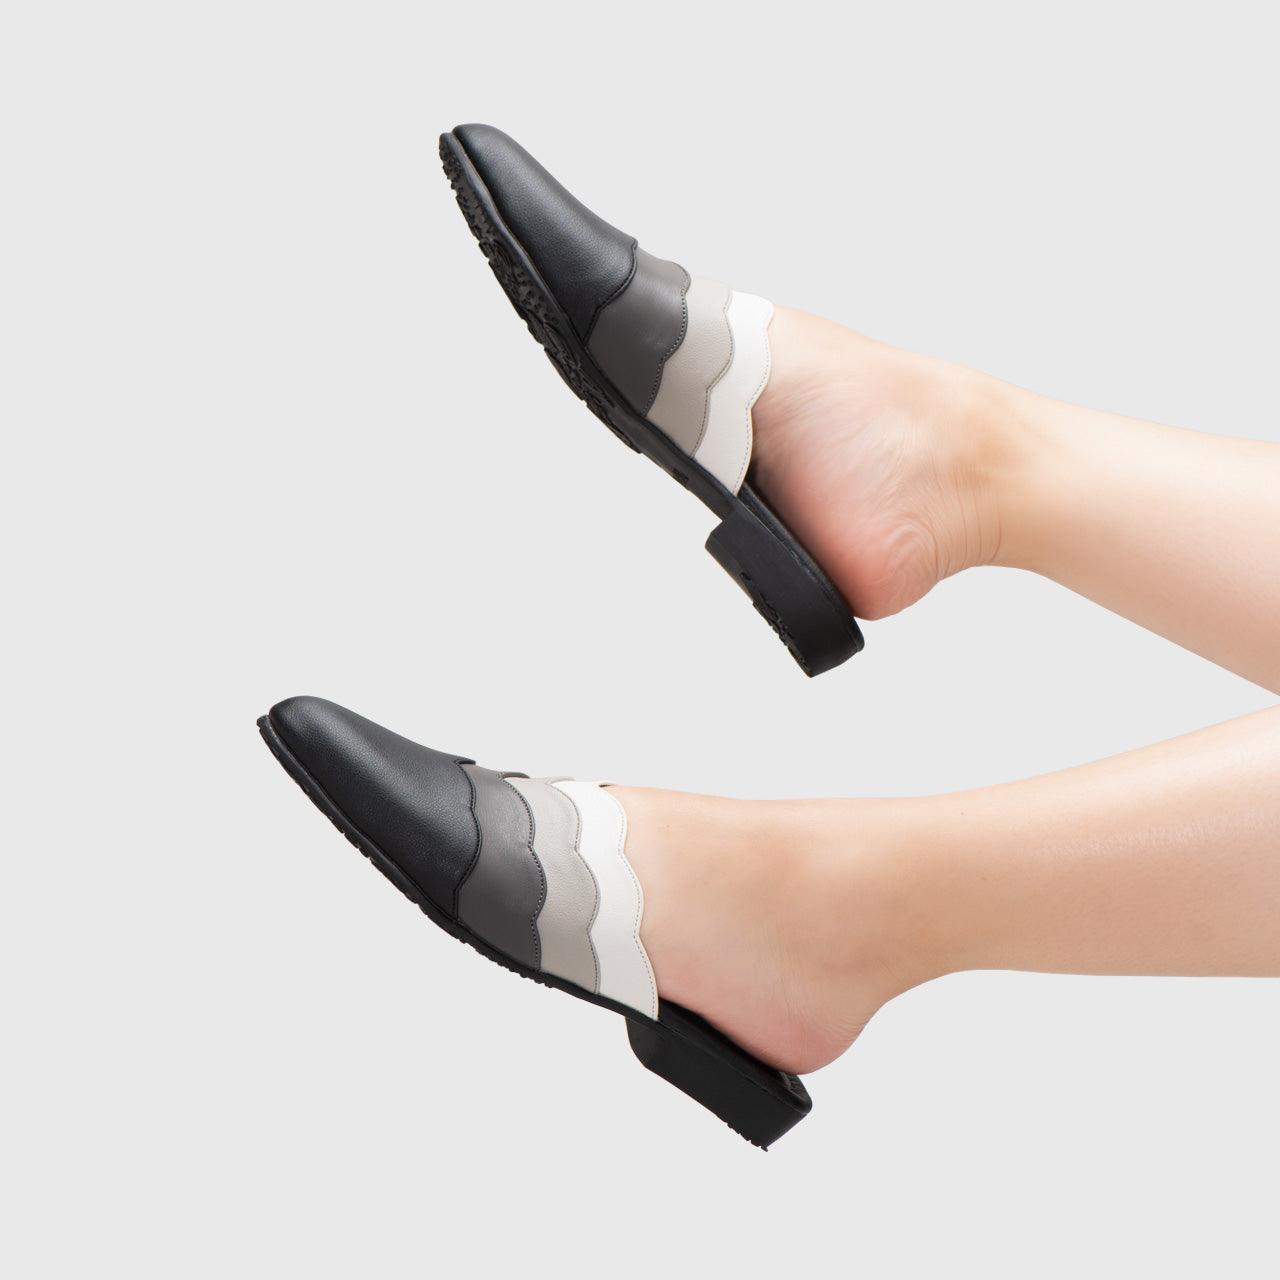 Adorable Projects-Dev Mules Inara Mules Monochrome